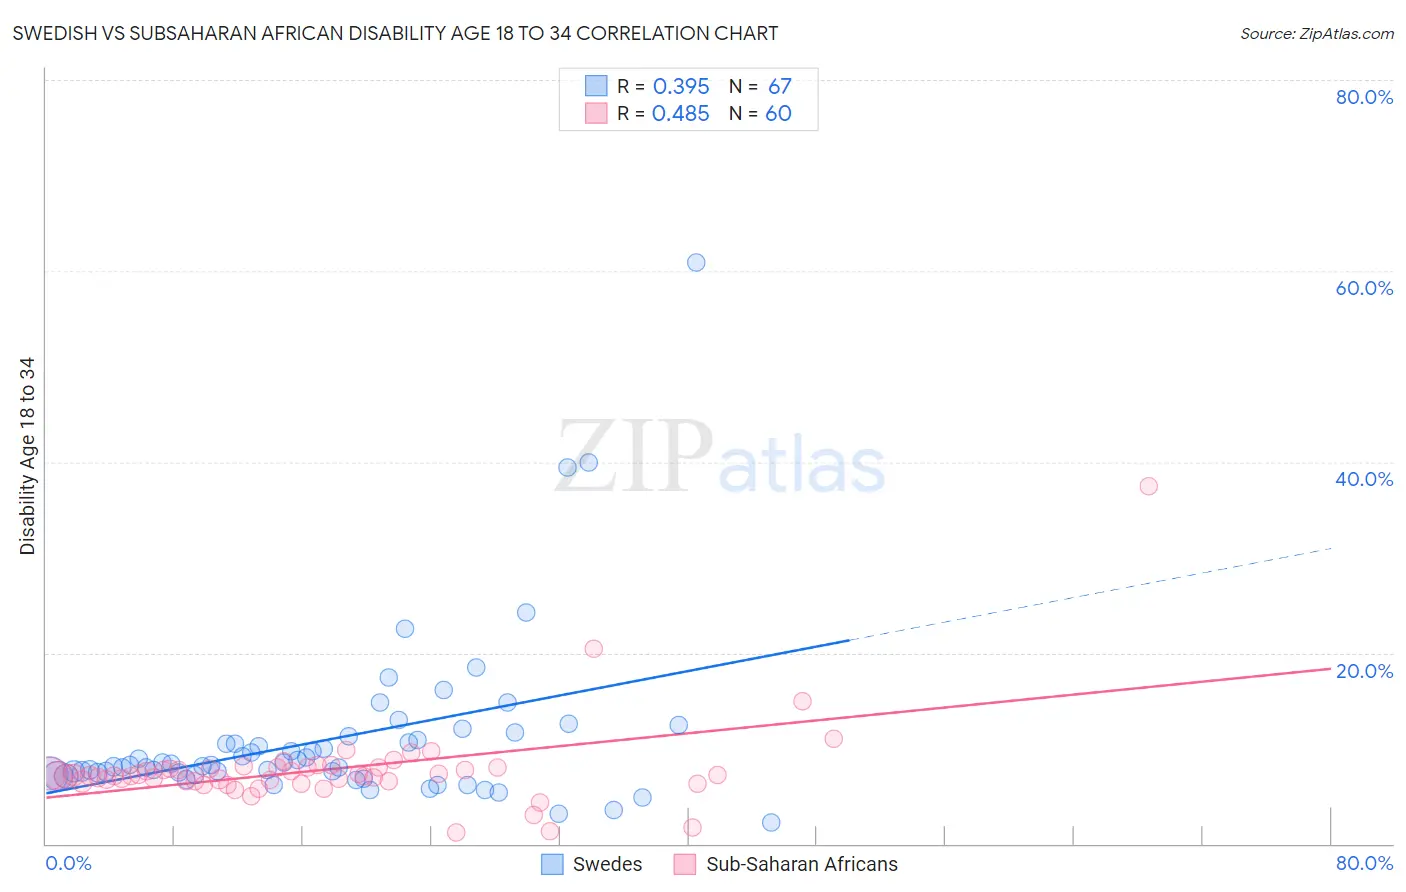 Swedish vs Subsaharan African Disability Age 18 to 34